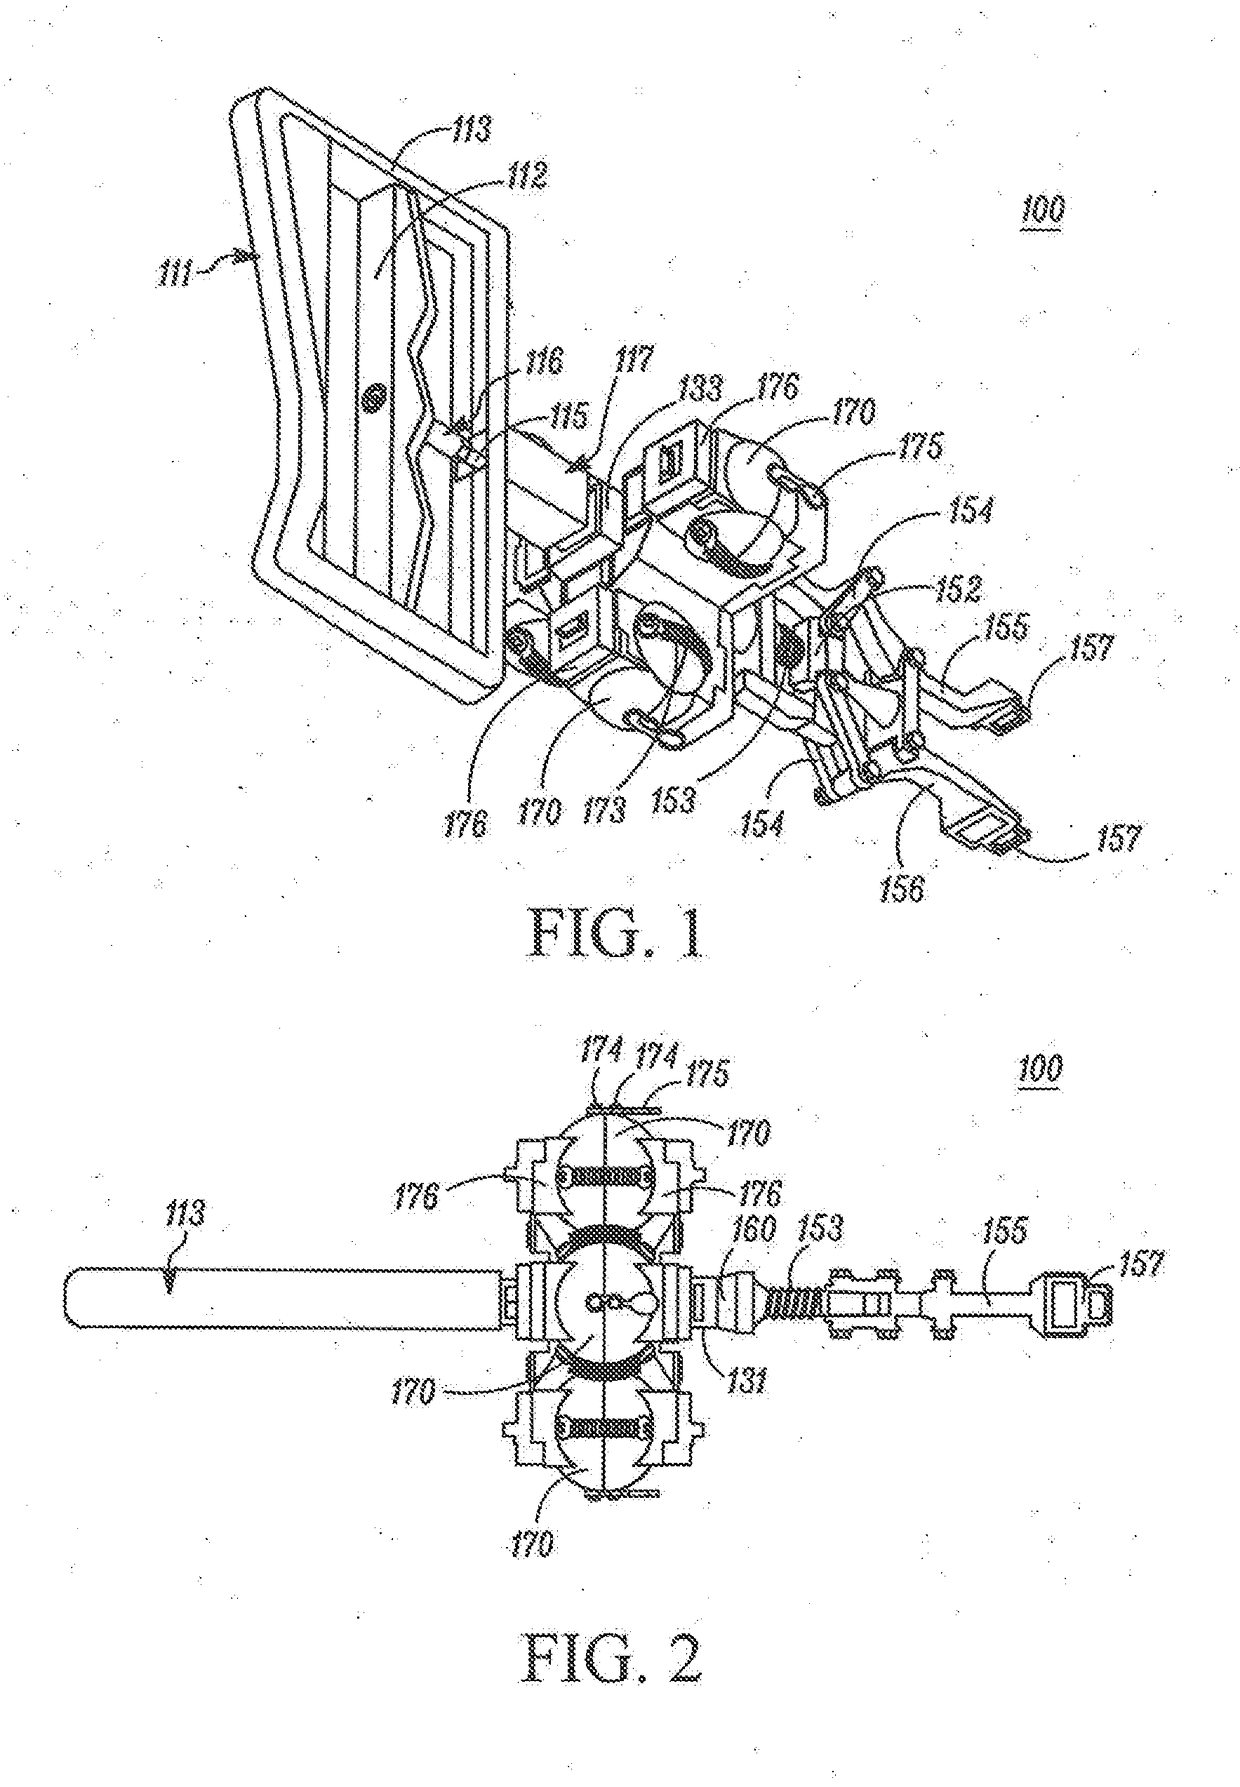 Device for taking multiple samples while avoiding cross-contamination